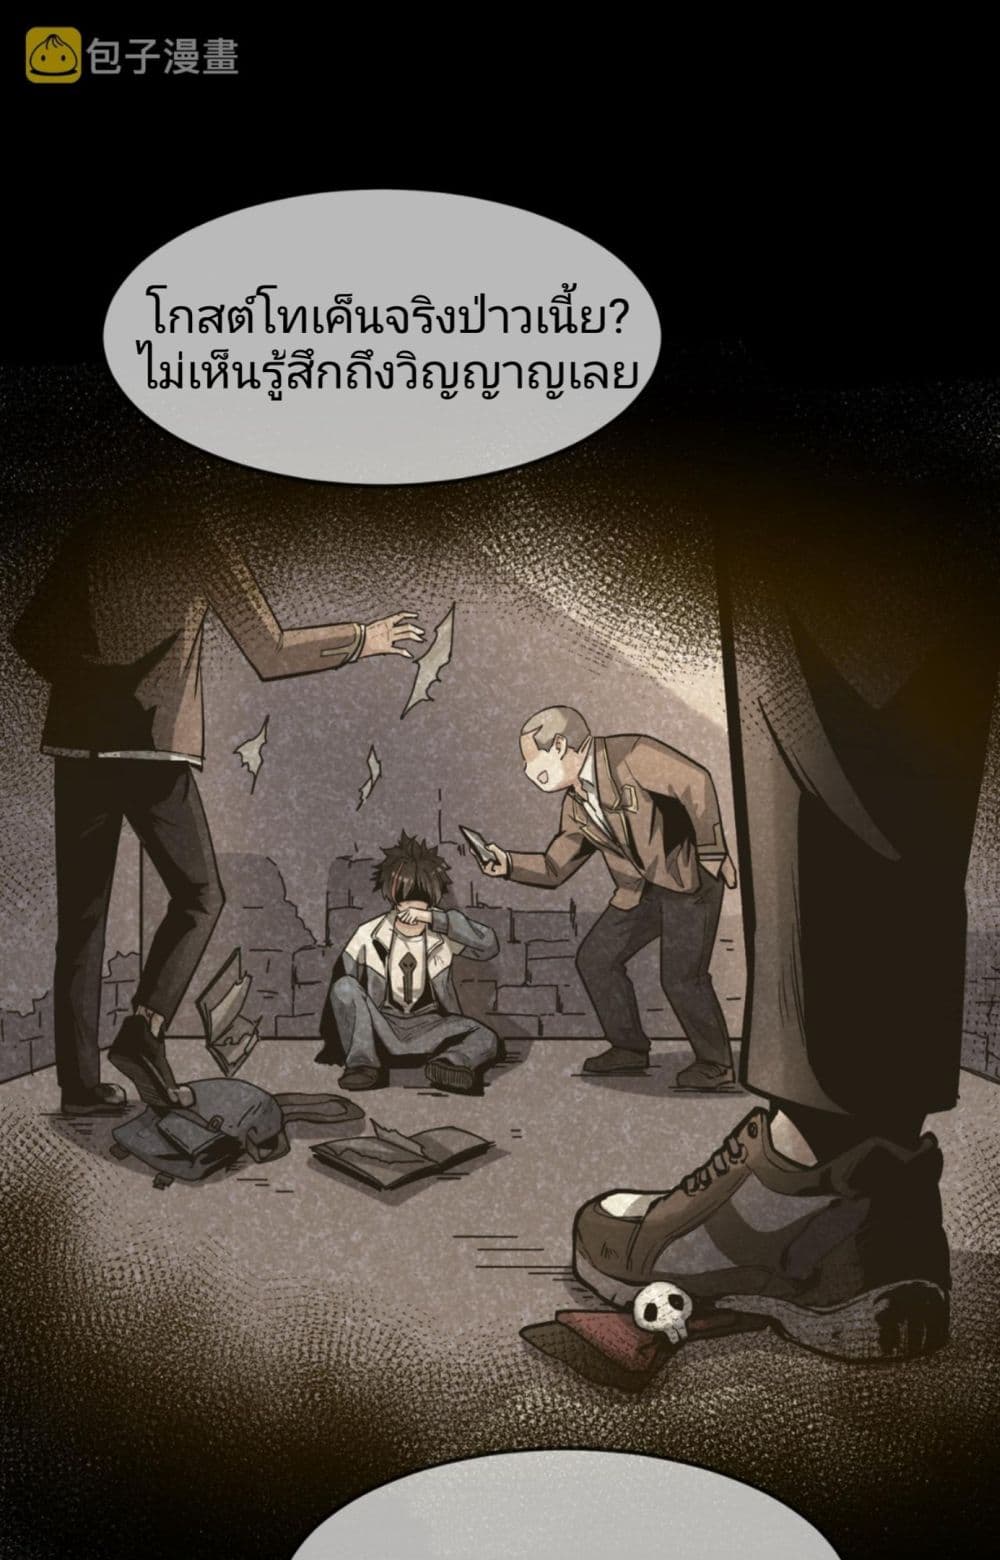 The Age of Ghost Spirits à¸à¸­à¸à¸à¸µà¹ 1 (14)